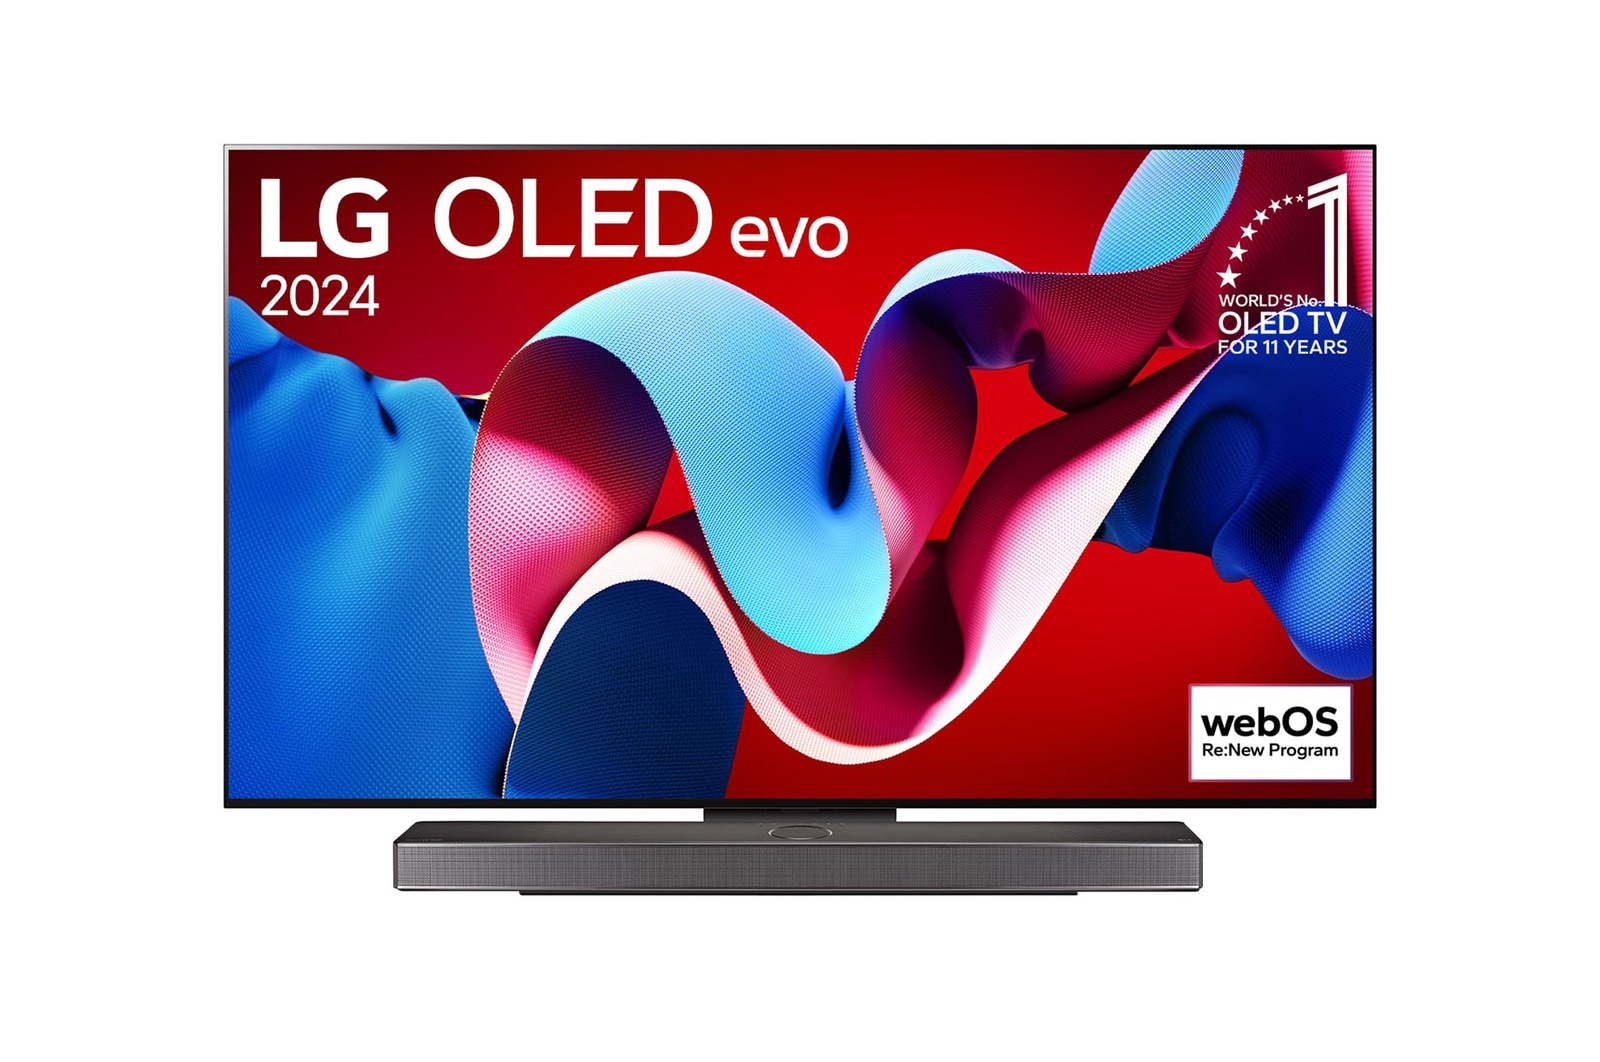 Front view with LG OLED evo TV, OLED C4, 11 Years of world number 1 OLED Emblem logo and webOS Re:New Program logo on screen, as well as the Soundbar below